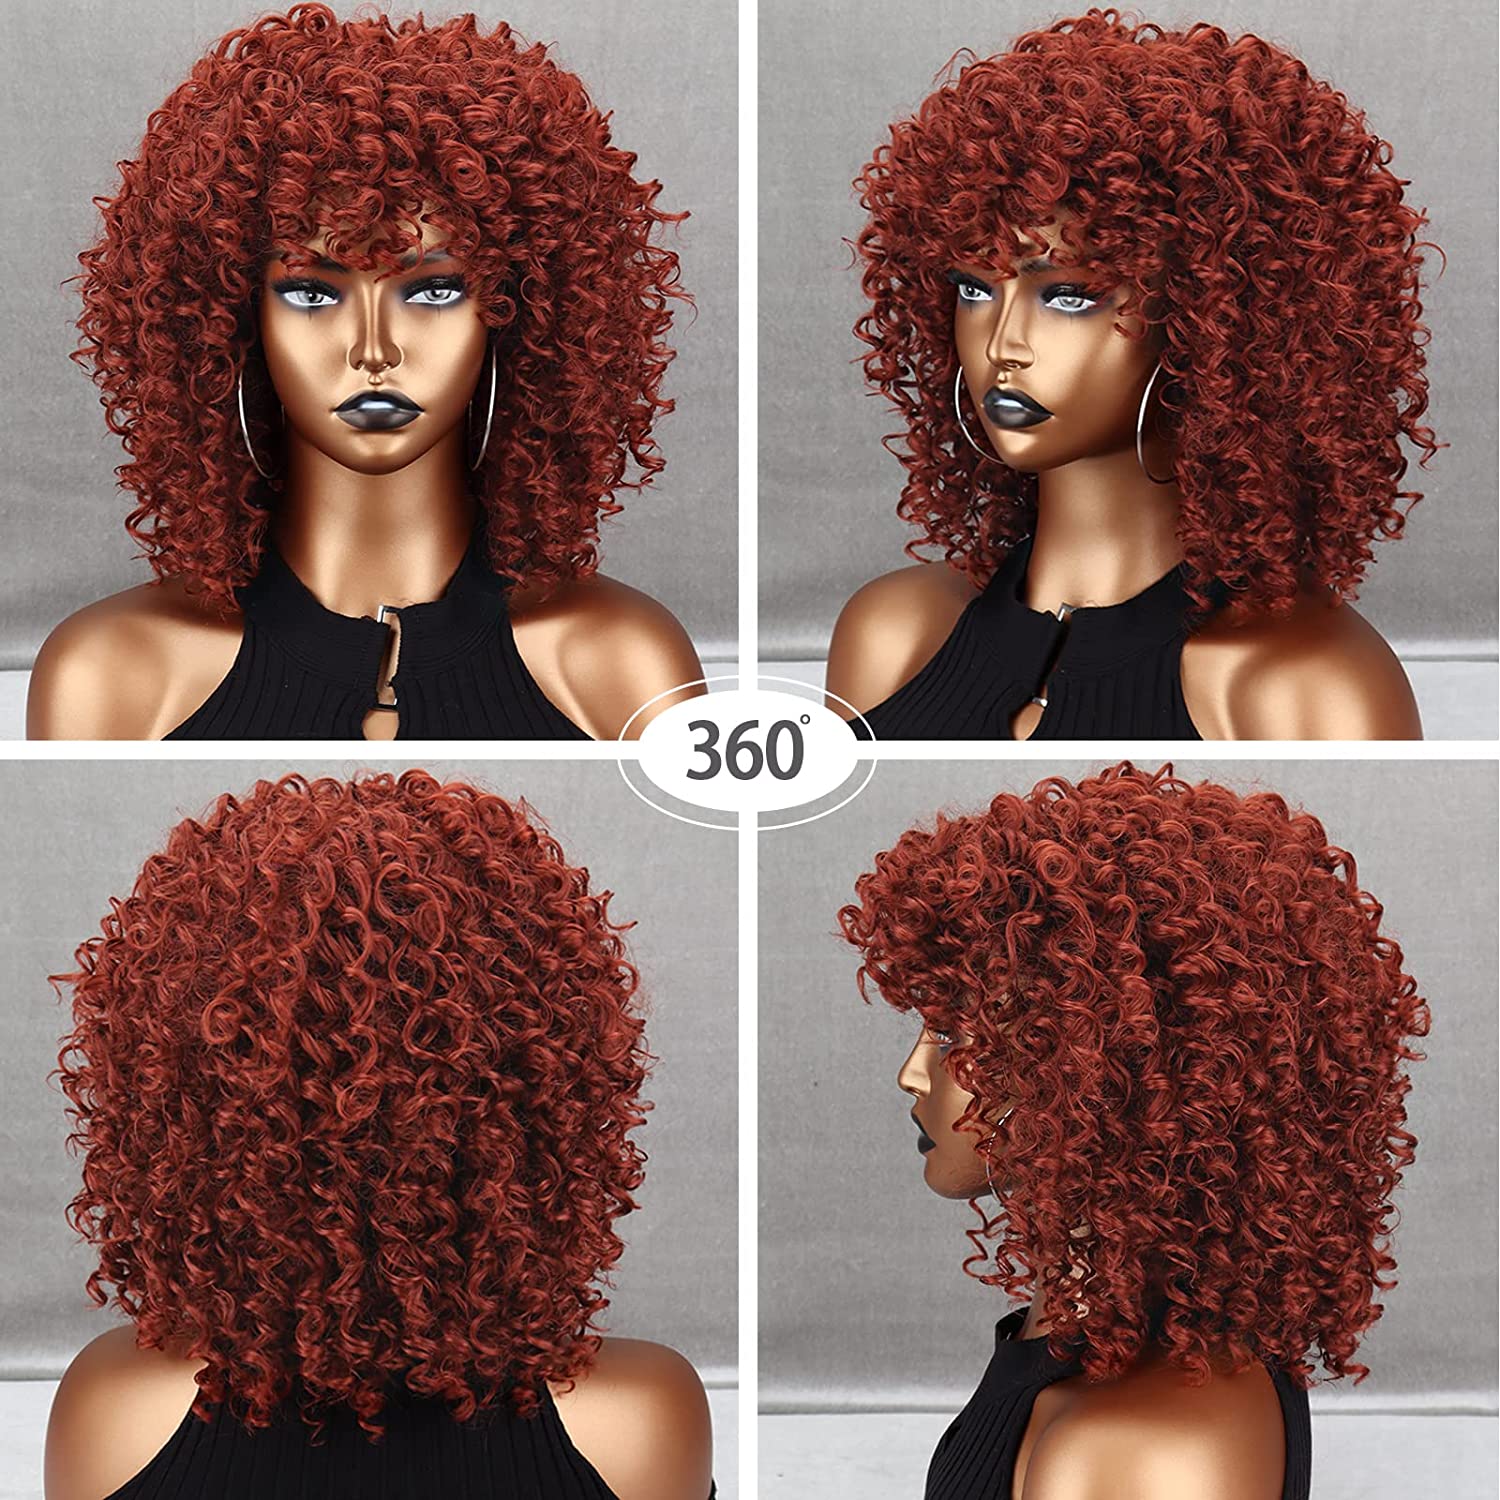 Curly Ginger Wig for Women, Afro Auburn Wigs 70s for Women, Afro Curly Wigs Natural Looking for Daily Cosplay